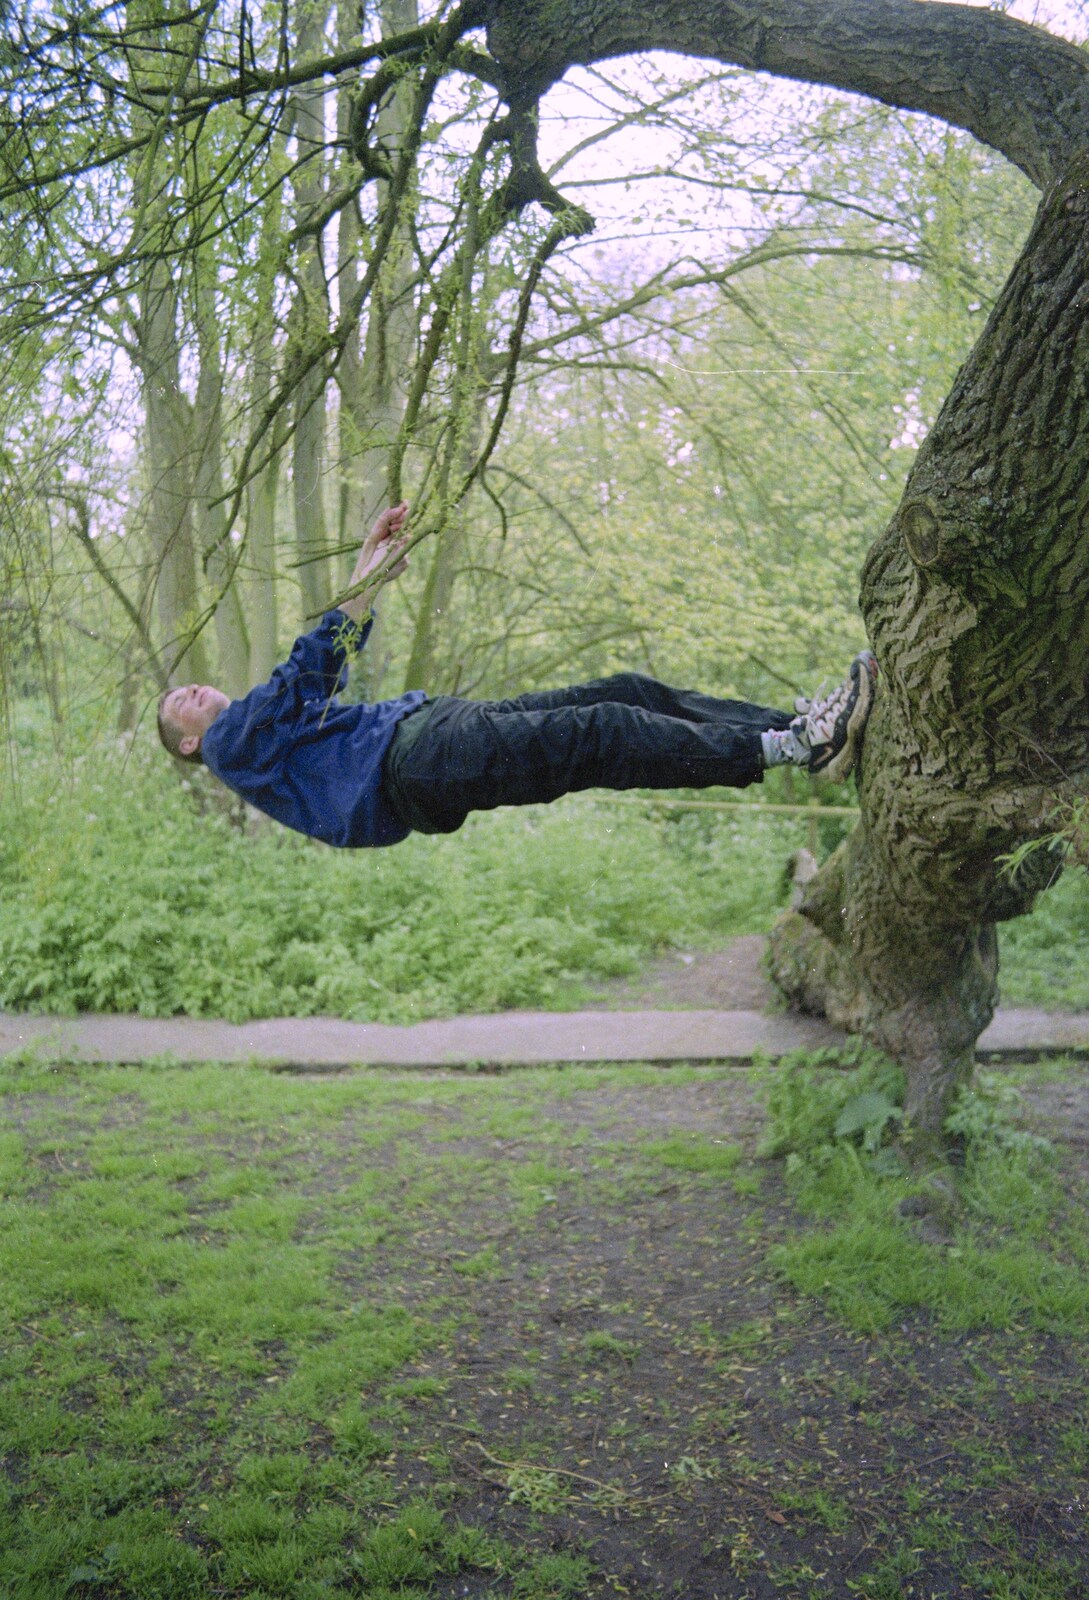 Apple hangs horizontally from a tree from A BSCC Bike Ride, Brockdish Greyhound and Hoxne Swan, Suffolk - 4th May 2000